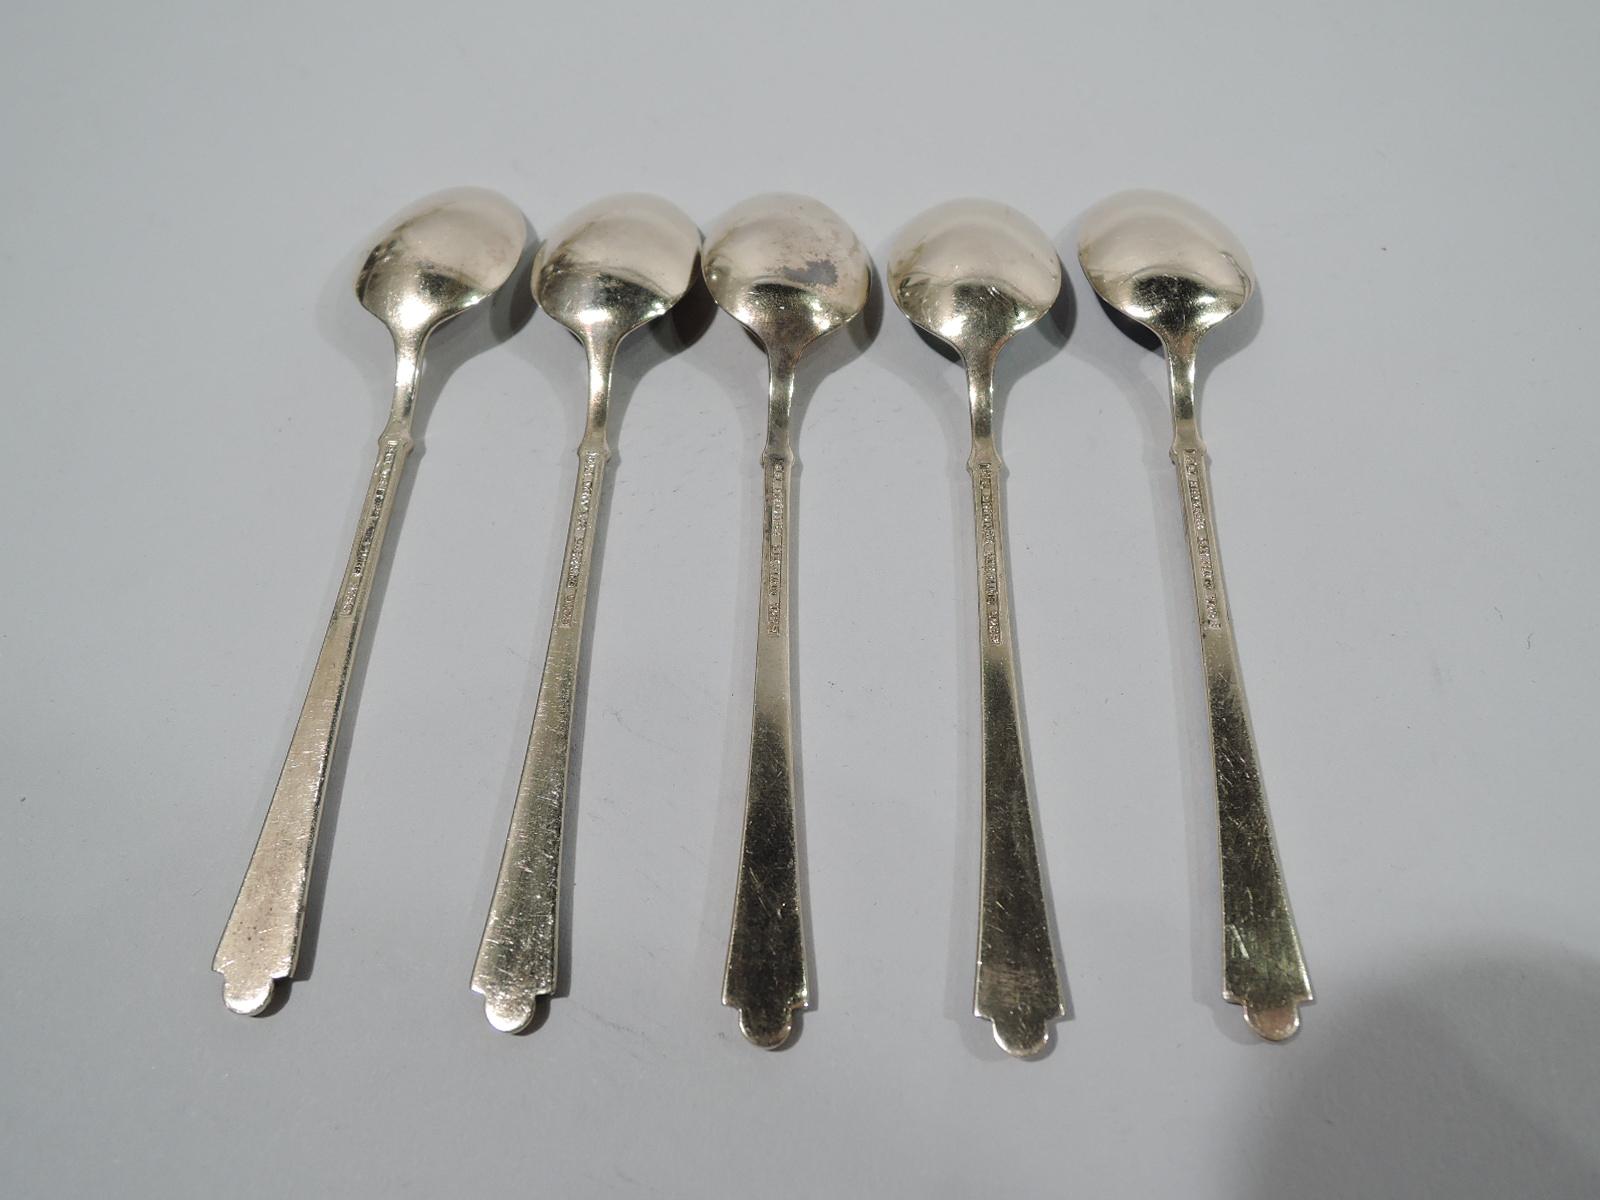 Set of 5 Mid-Century Modern gilt sterling silver and guilloche enamel demitasse spoons. Made by Egon Lauridsen in Denmark. Oval bowl with scalloped enameling. Tapering handle with ball terminal and enameling in diagonal silver gilt frames. Reverse